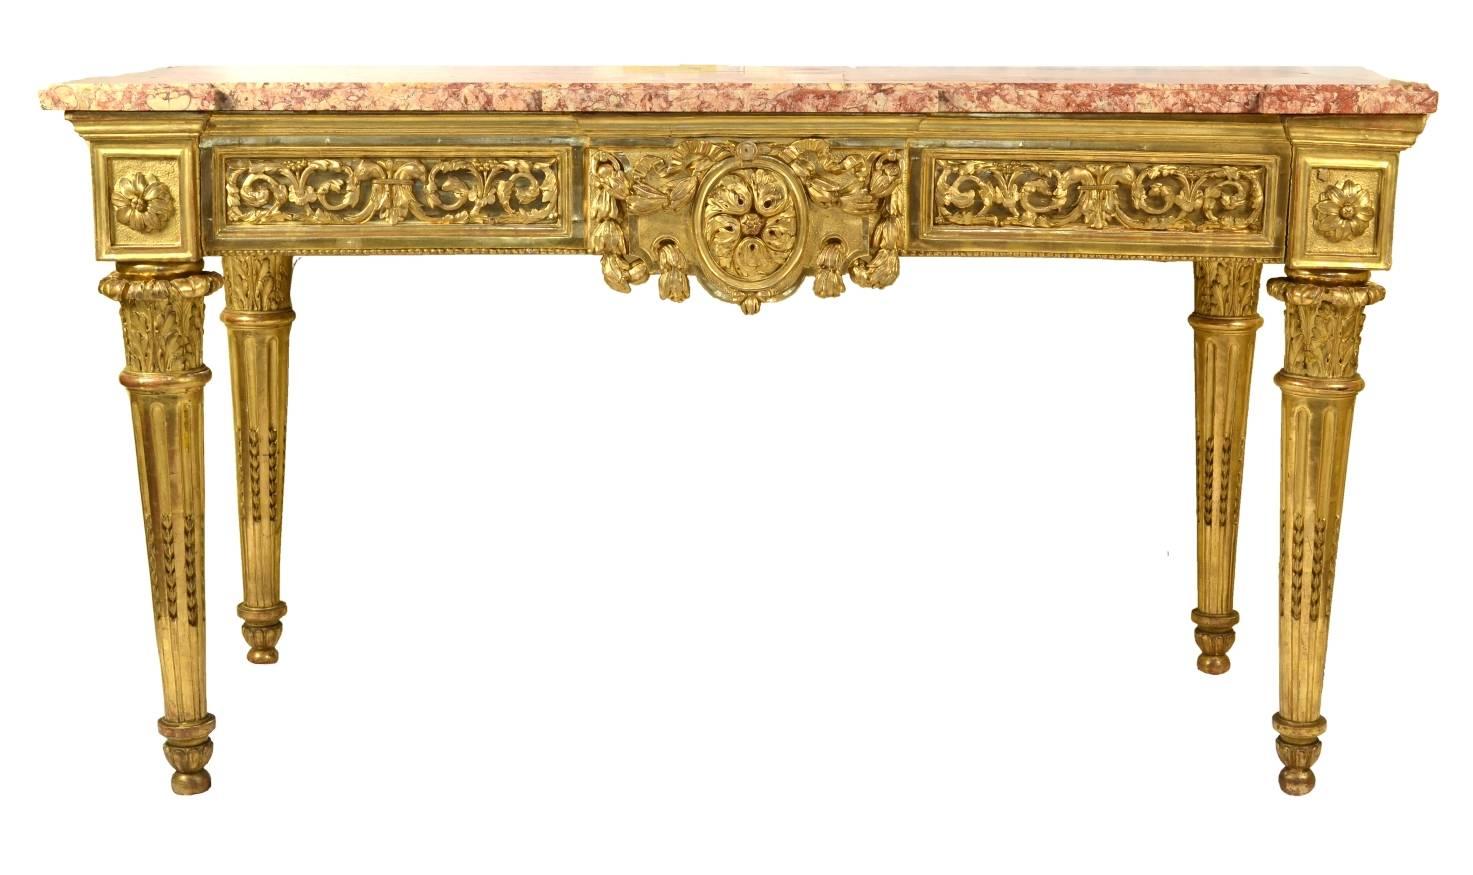 Fine Italian carved and giltwood neoclassical console table, the original marble top (Spanish brocatello) over the apron with a center medallion mounted with a large floral boss and bellflower swags; the inset panels with applied leaves, scrolls and